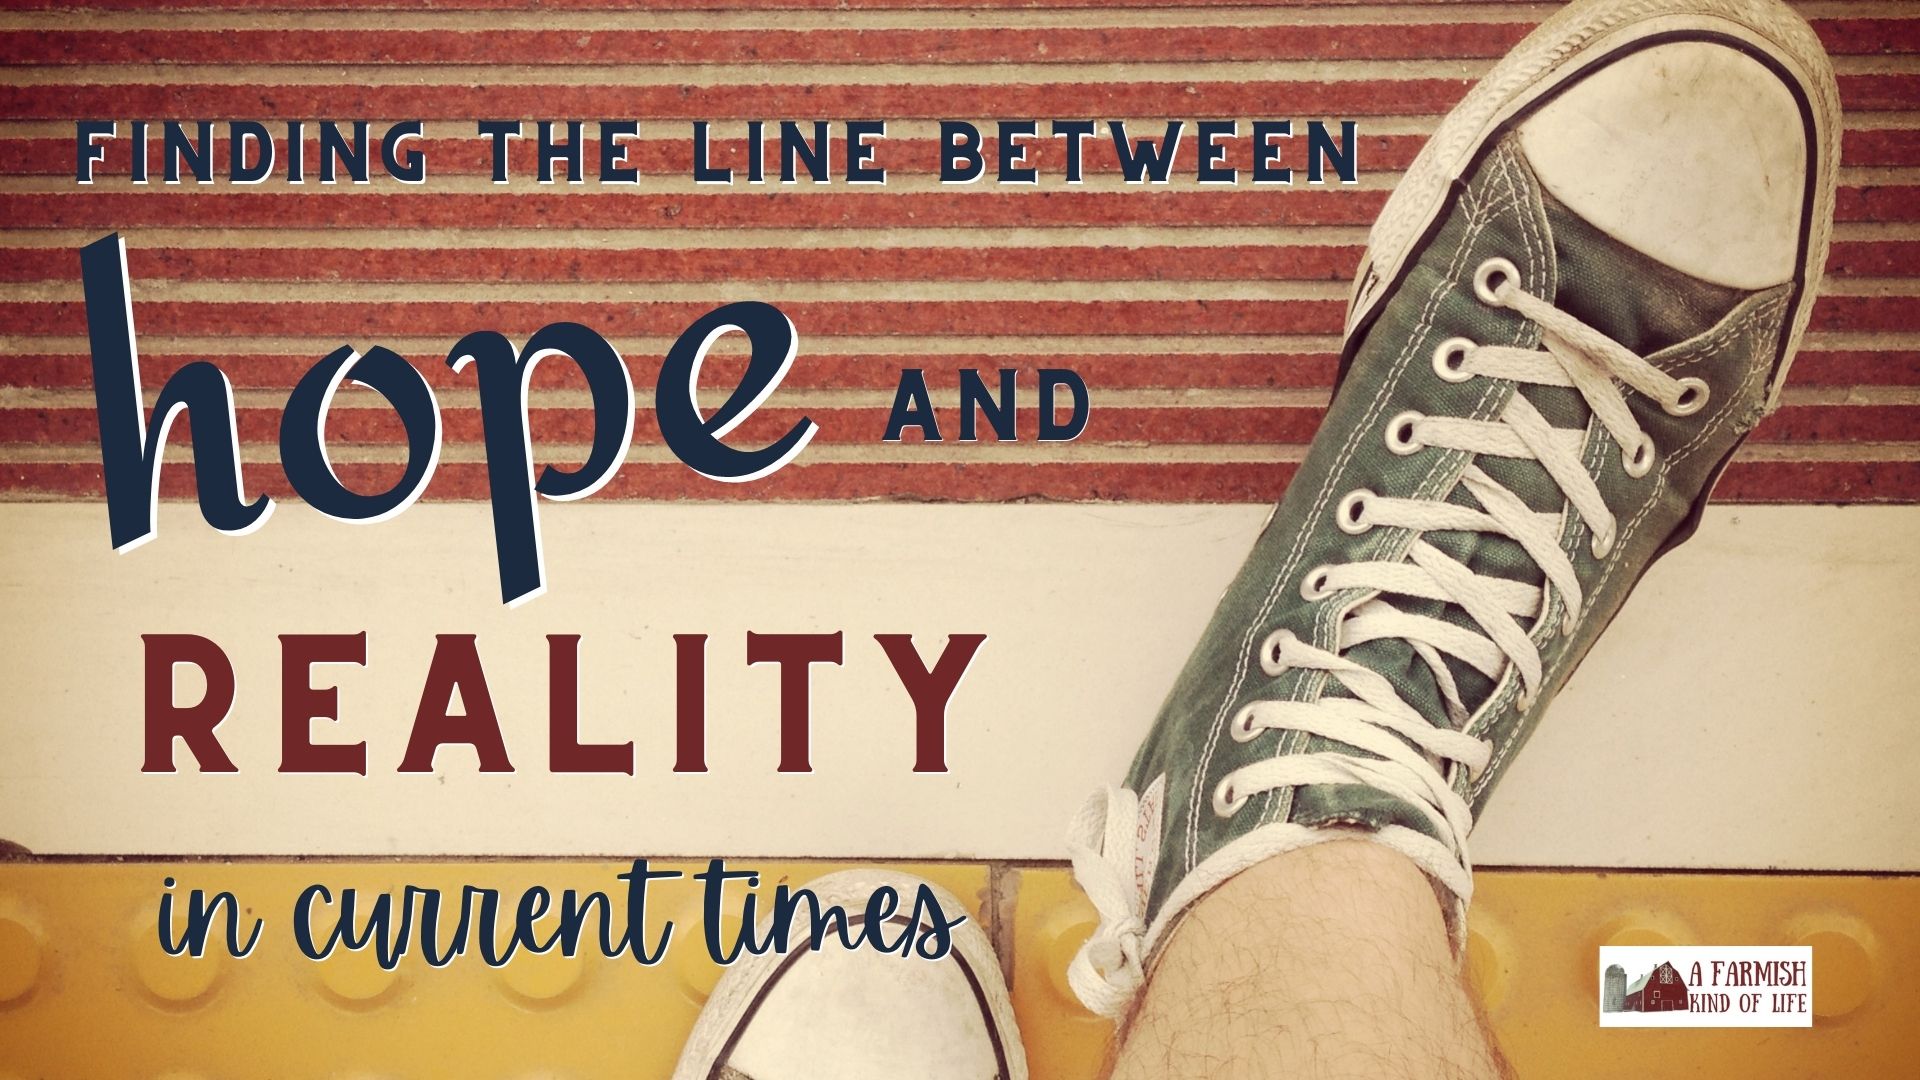 173: The line between hope and reality